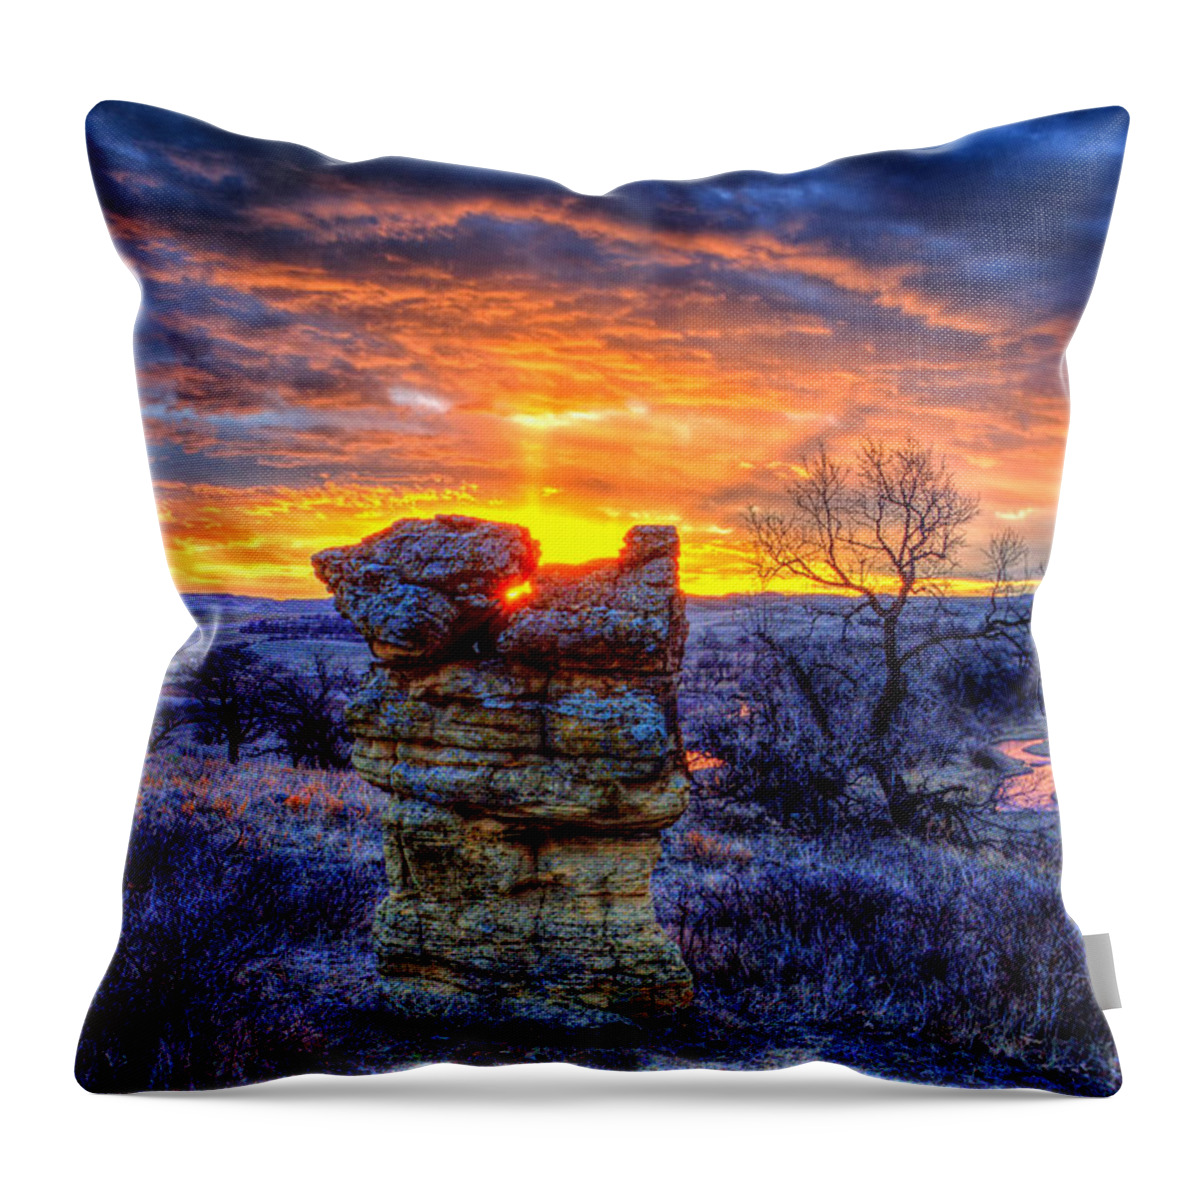 Monolith Throw Pillow featuring the photograph Monolithic Sunrise by Fiskr Larsen